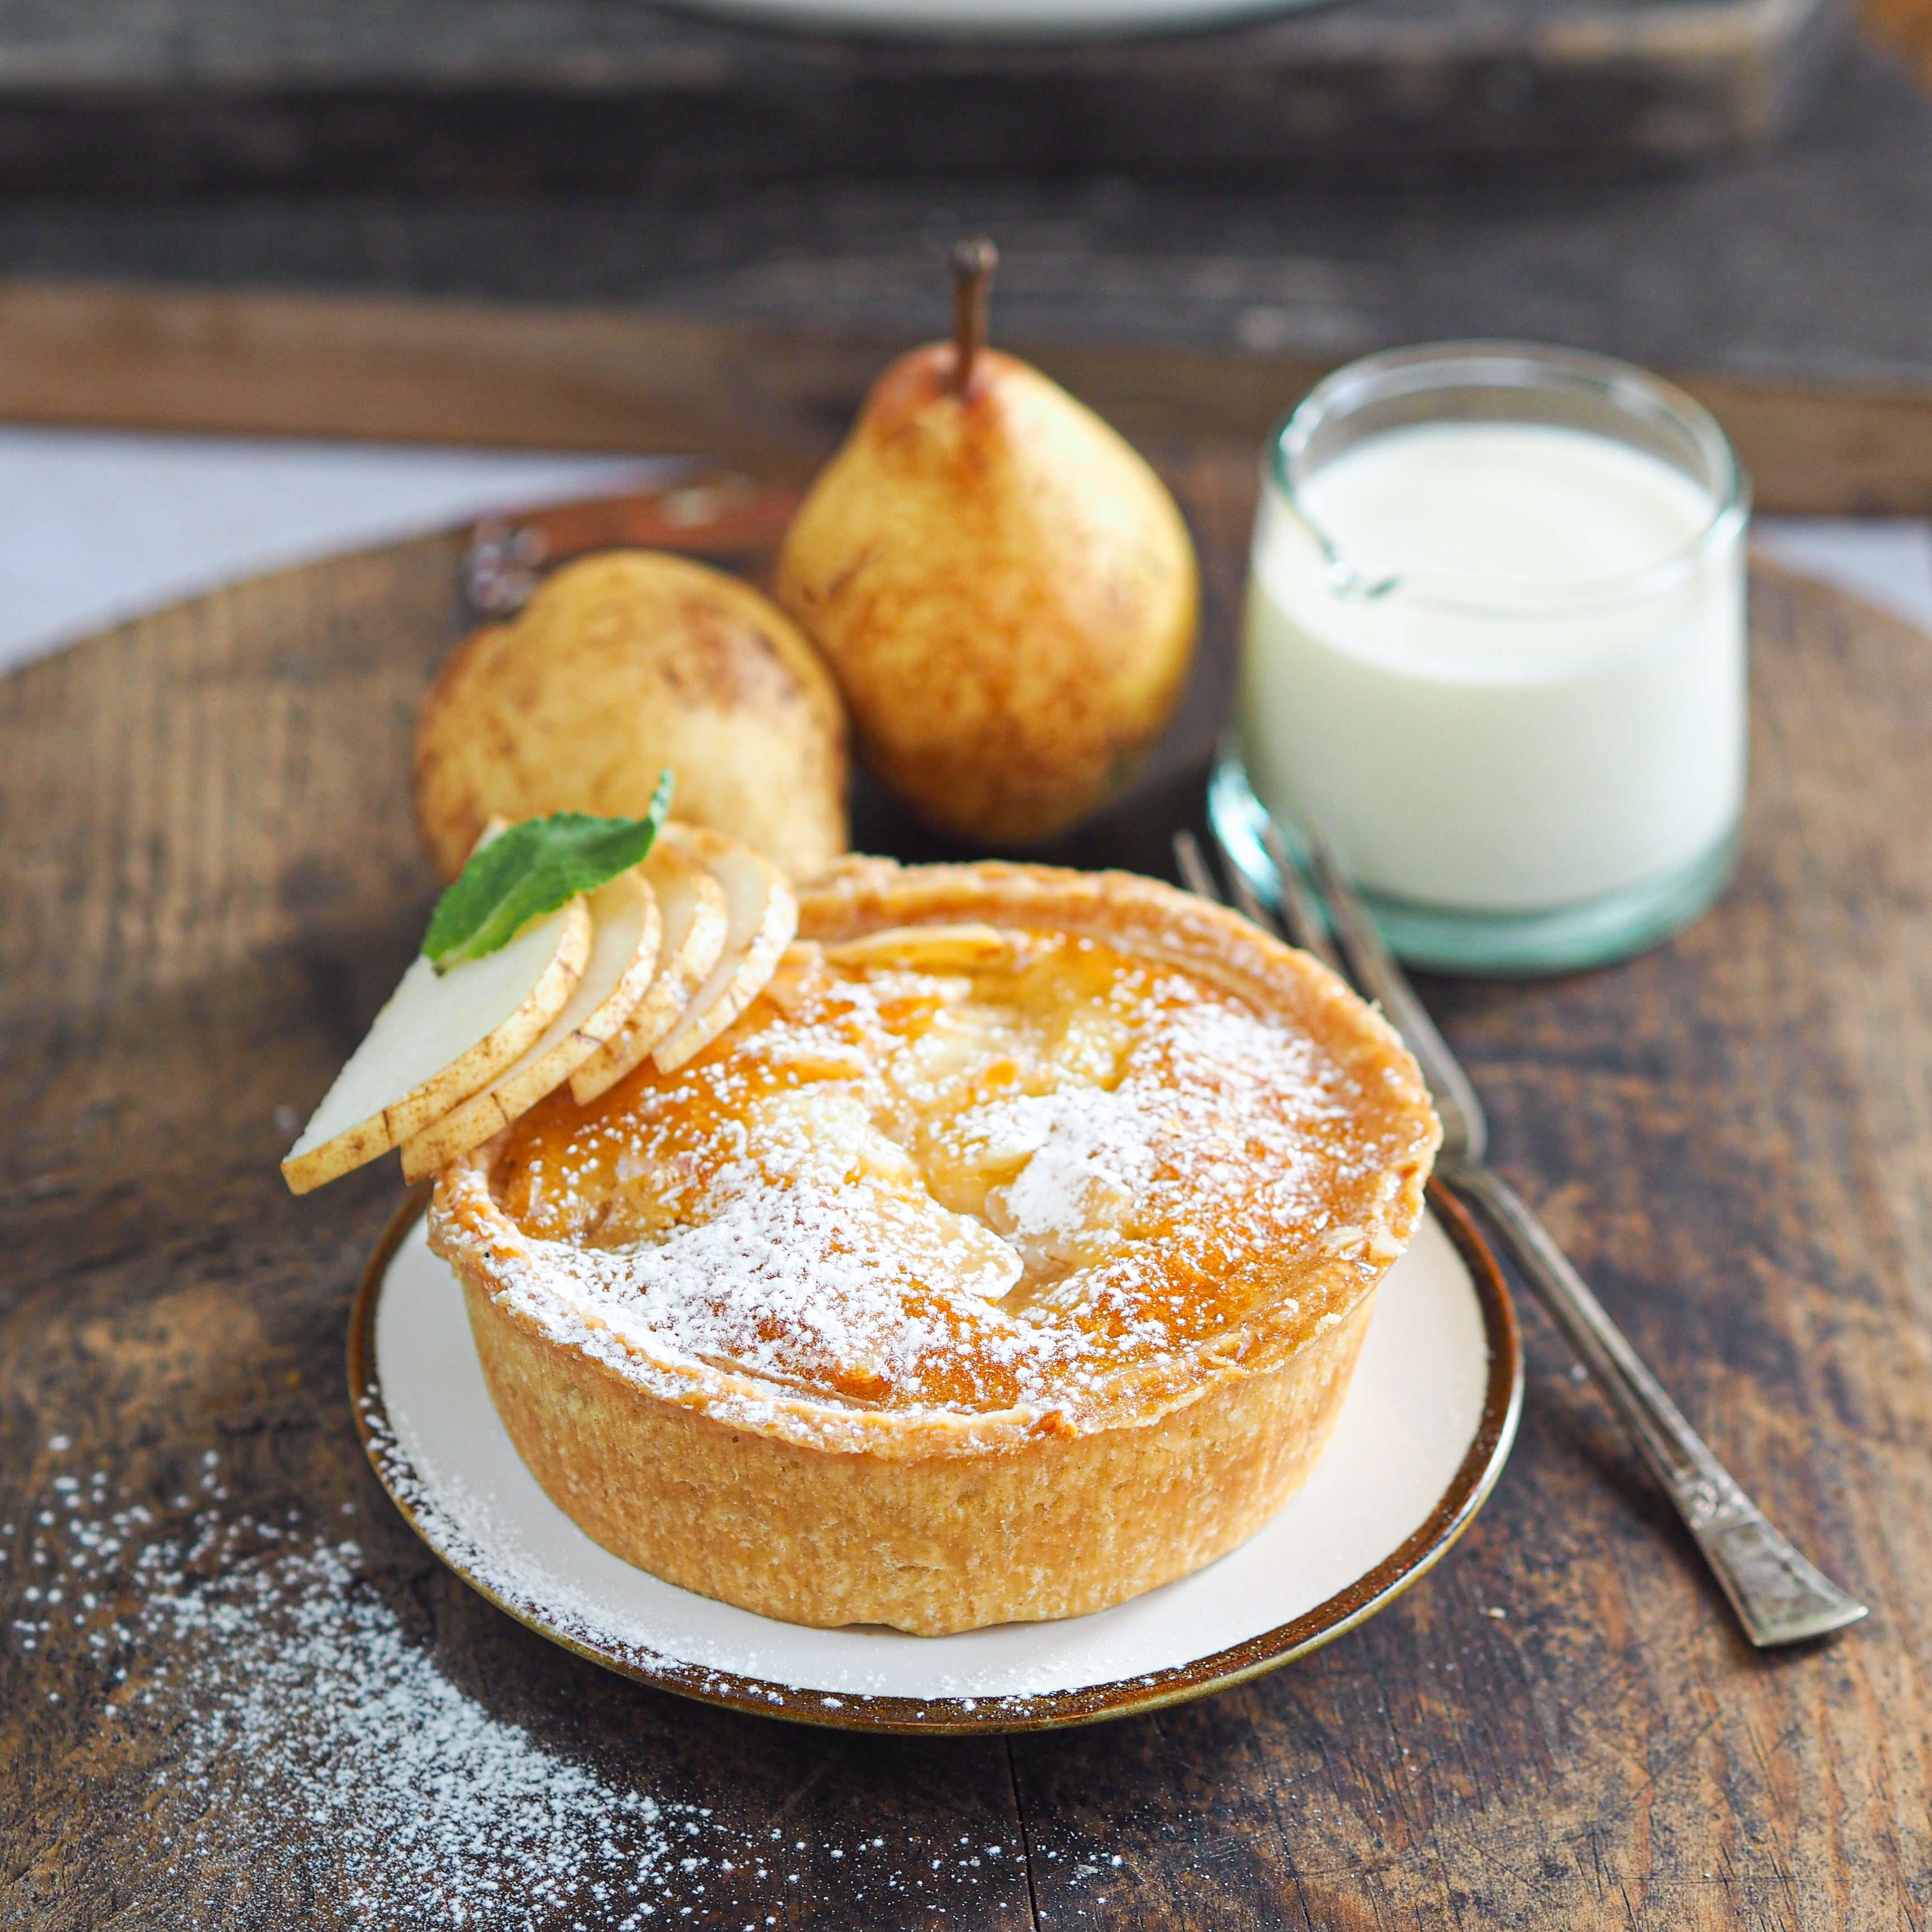 Pear & Almond Tart - Council - by Dulwich Pantry - HomeCooks